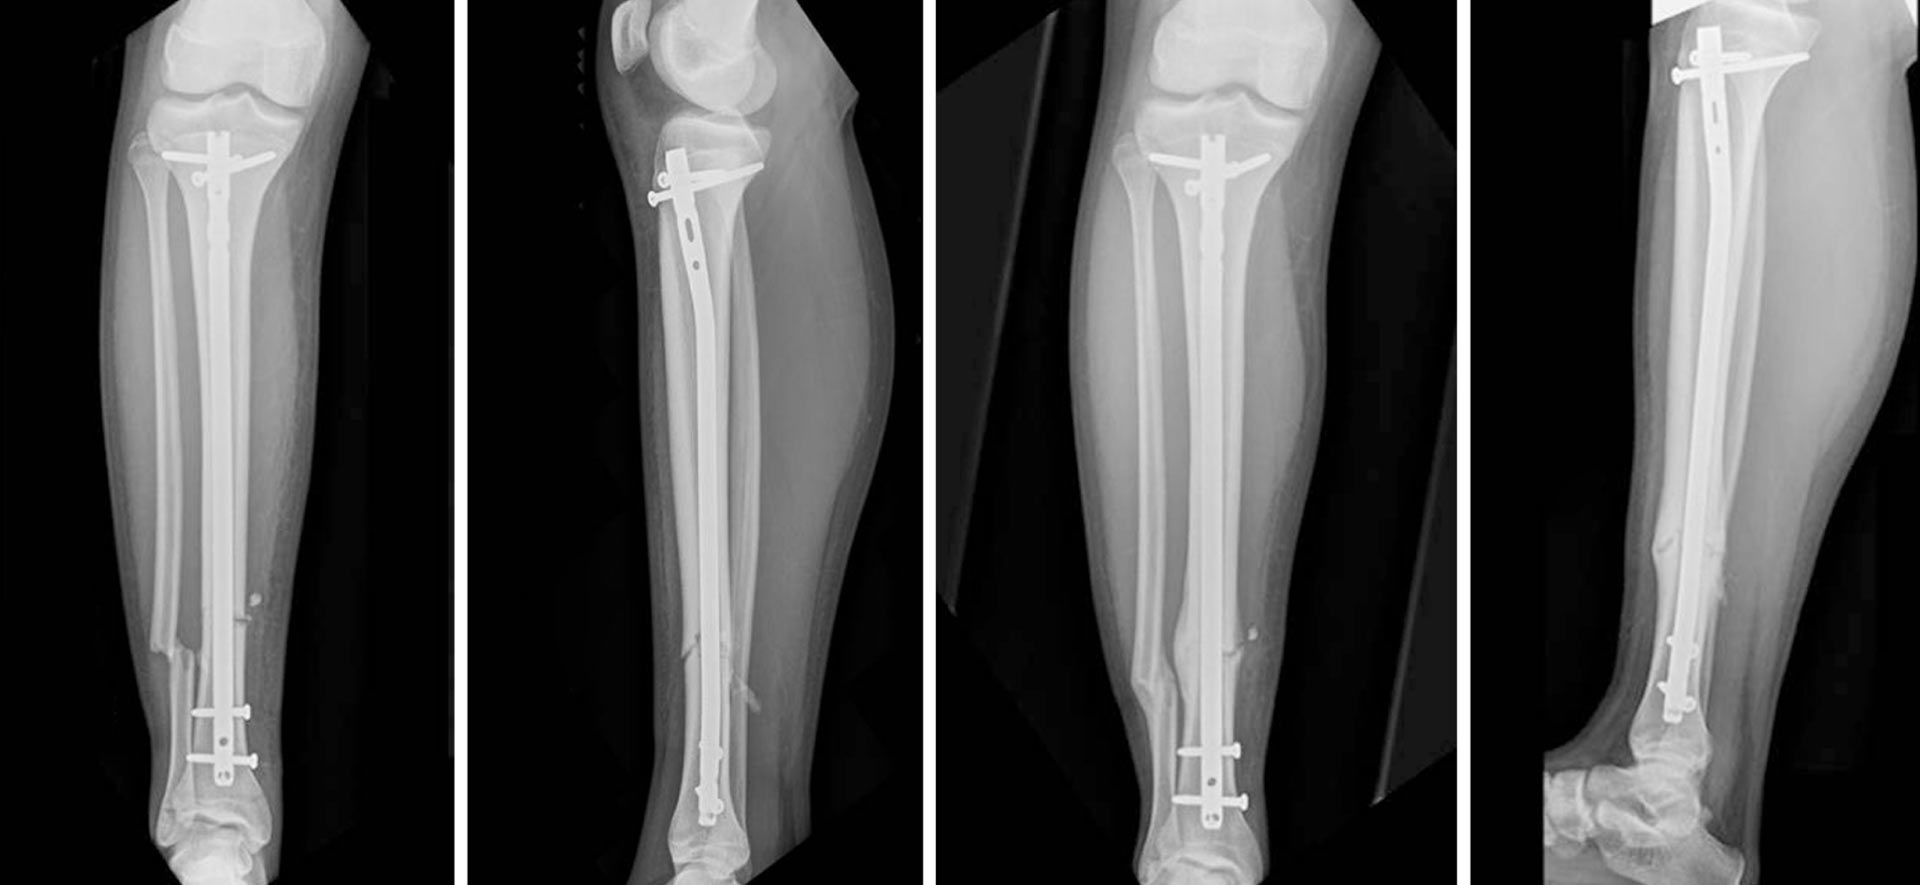 Spontaneous Posterior Migration of an Antegrade, Reamed Intramedullary Tibial  Nail Following Locking Bolt Removal, a Delayed Presentation